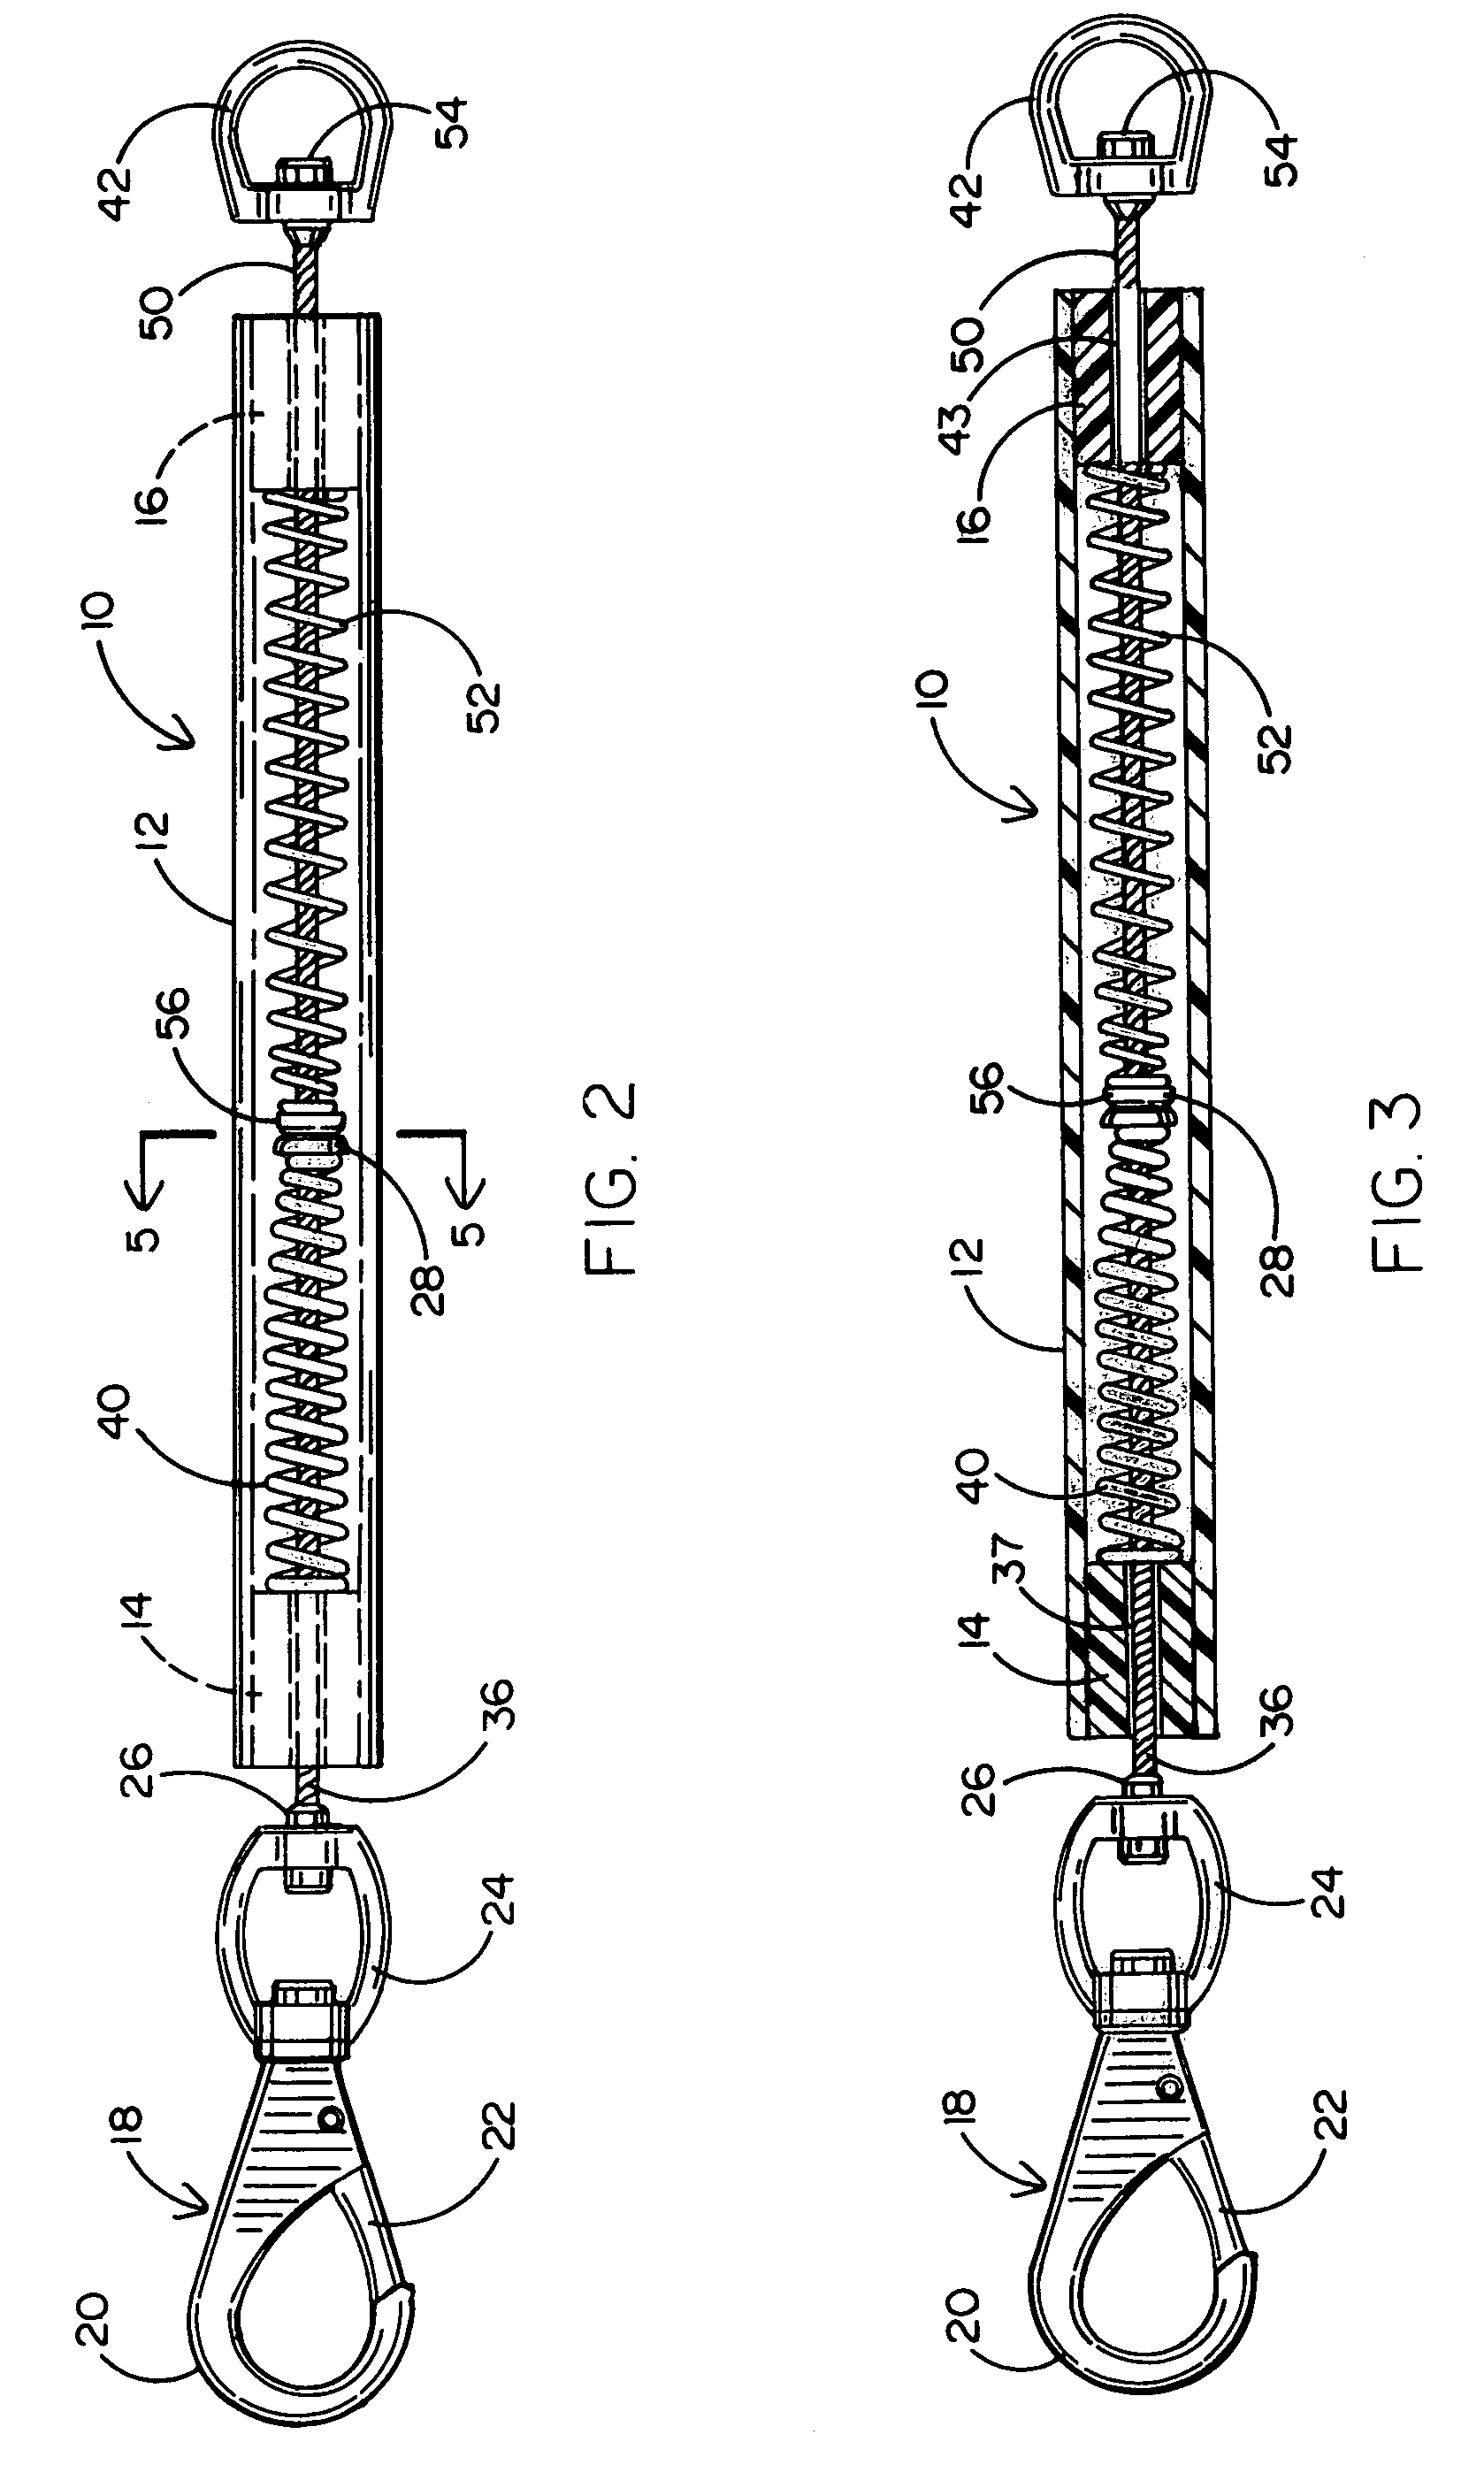 Shock absorber for attachment to a dog leash